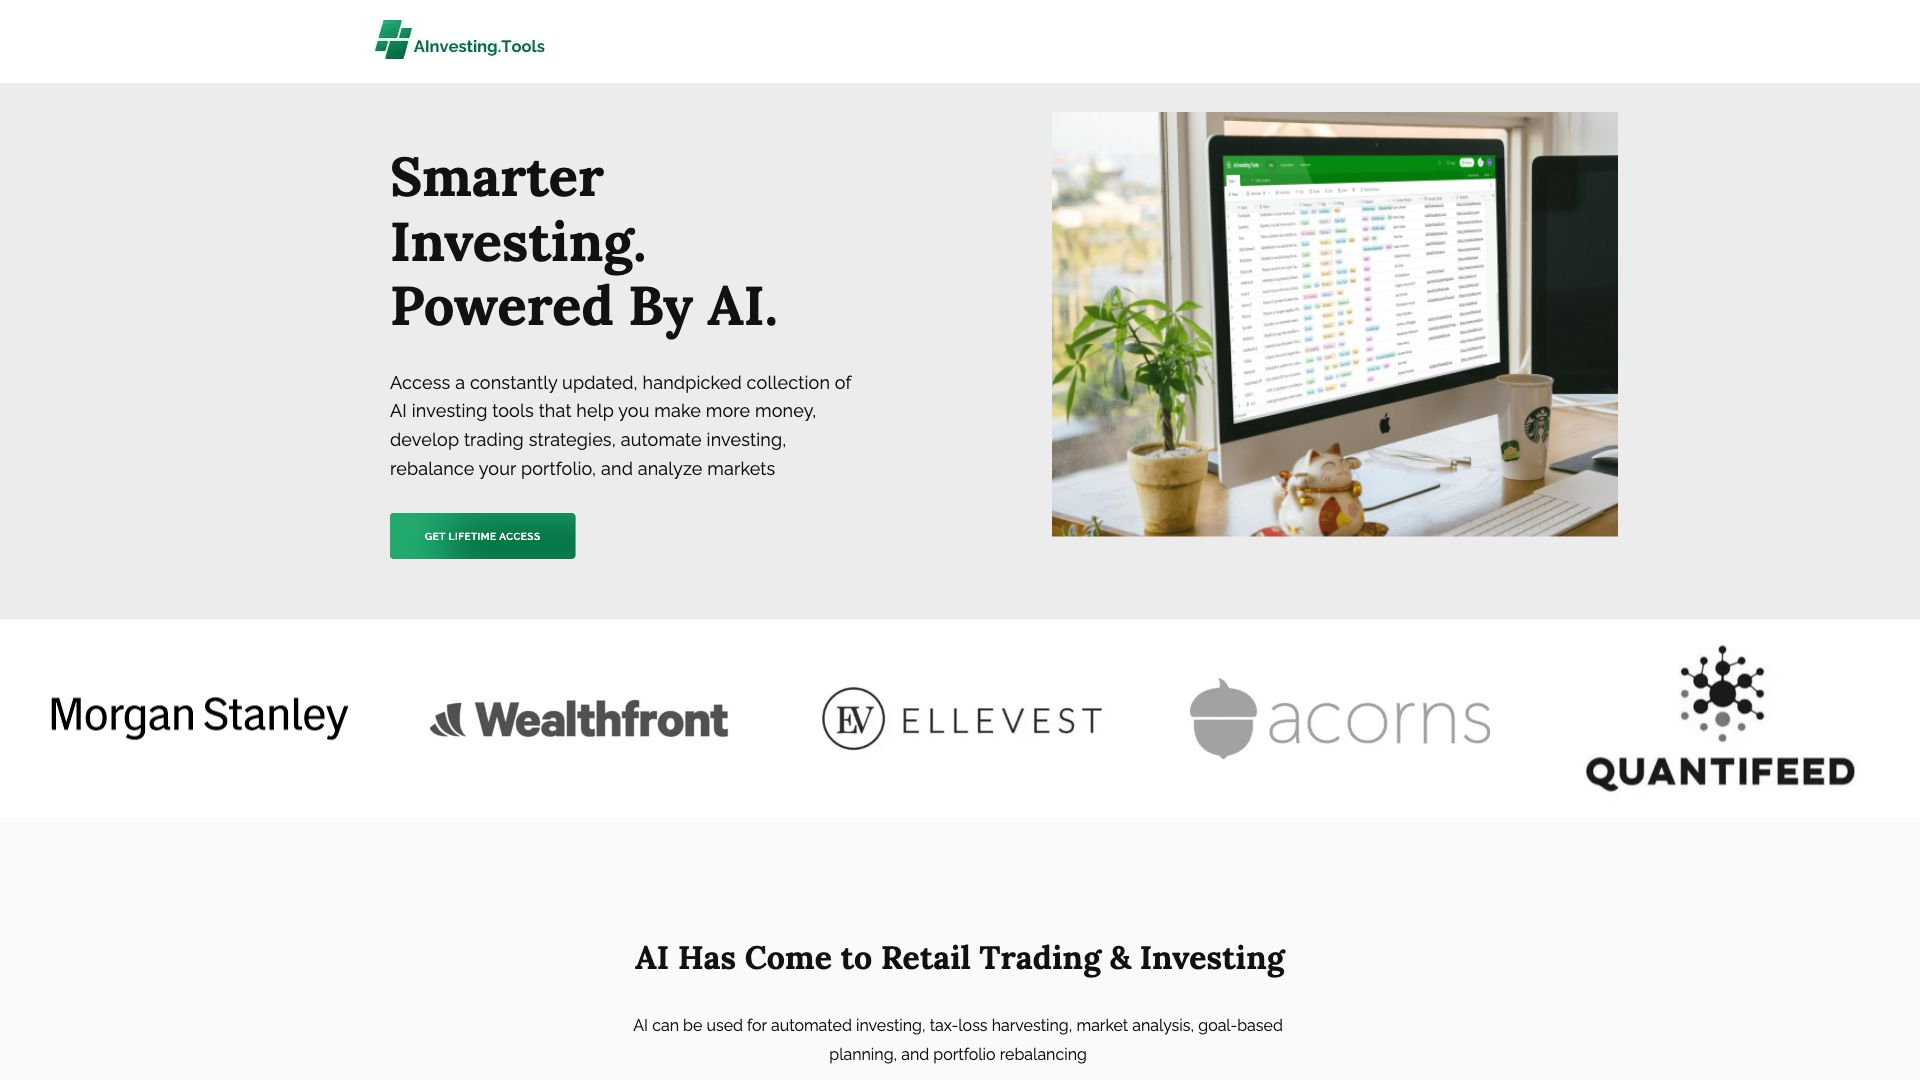 AInvesting Tools